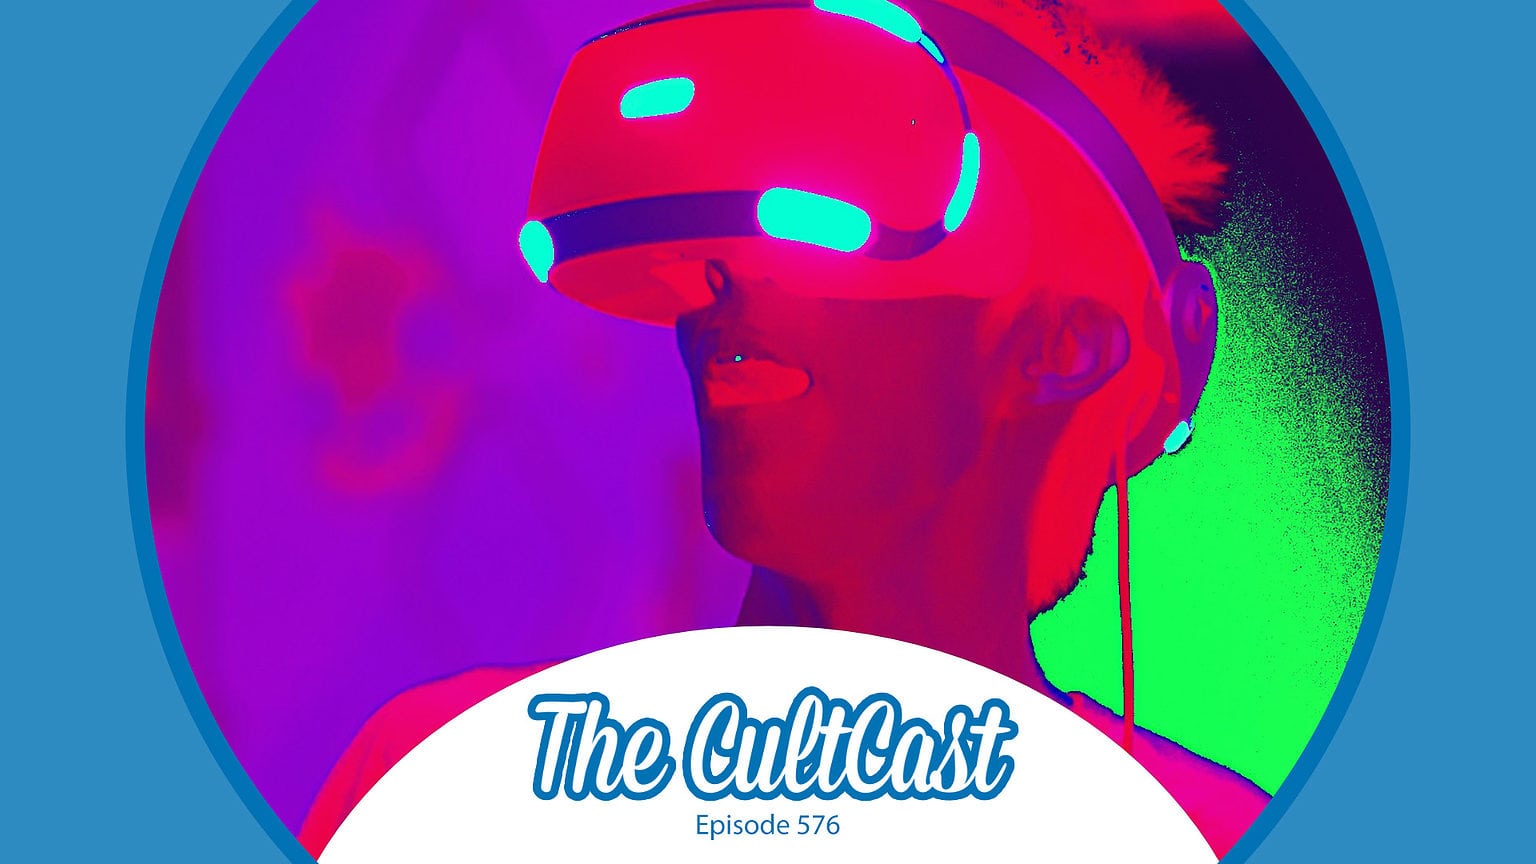 A manipulated image of a person wearing a virtual reality headset, used to illustrate the contents of The CultCast, our weekly Apple podcast.